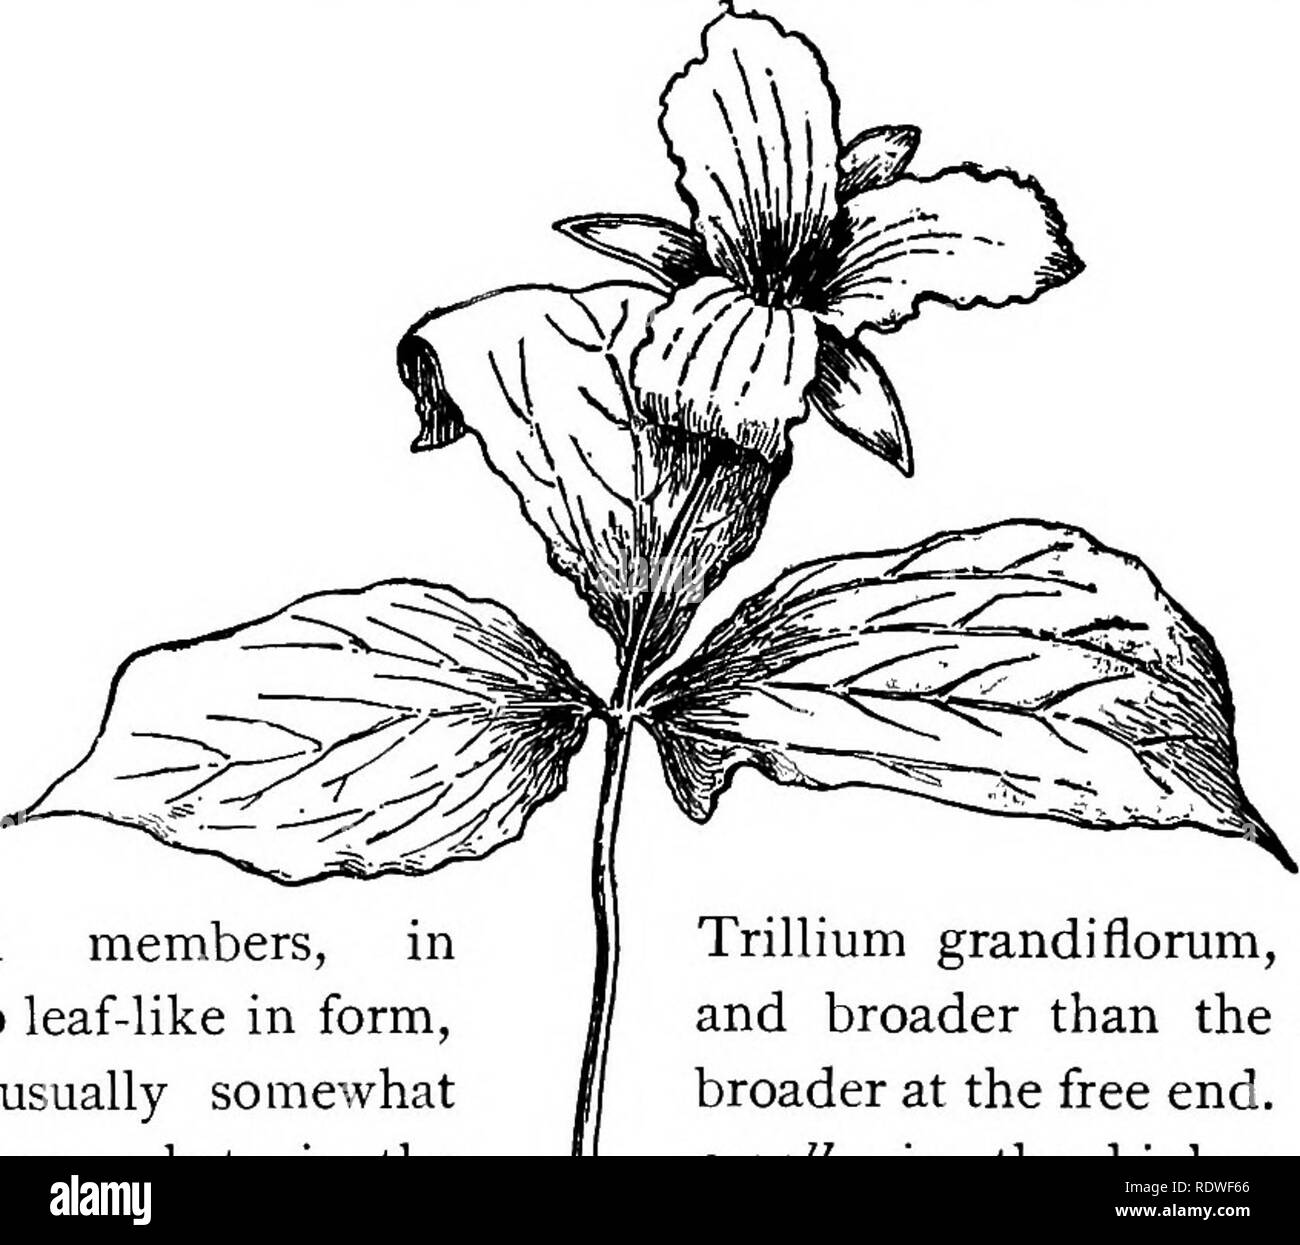 . Elementary botany. Botany. 222 MOKPHOLOG Y. 442. Corolla.—Next above the calyx is a whorl of white or. Trillium grandiflorum, which and broader than the sepals, broader at the free end. These corolla in the higher plants, corolla is a pelal. But while flower, and are not green, tion would suggest that they series. Within and above the inser- found another tier, or whorl, at first sight resemble leaves in in the higher plants as stamens. stamen possesses a stalk ( = fil- along on either side for the are four ridges, two on each stamen is the anther, and the sacs, or lobes, opened, these an- s Stock Photo